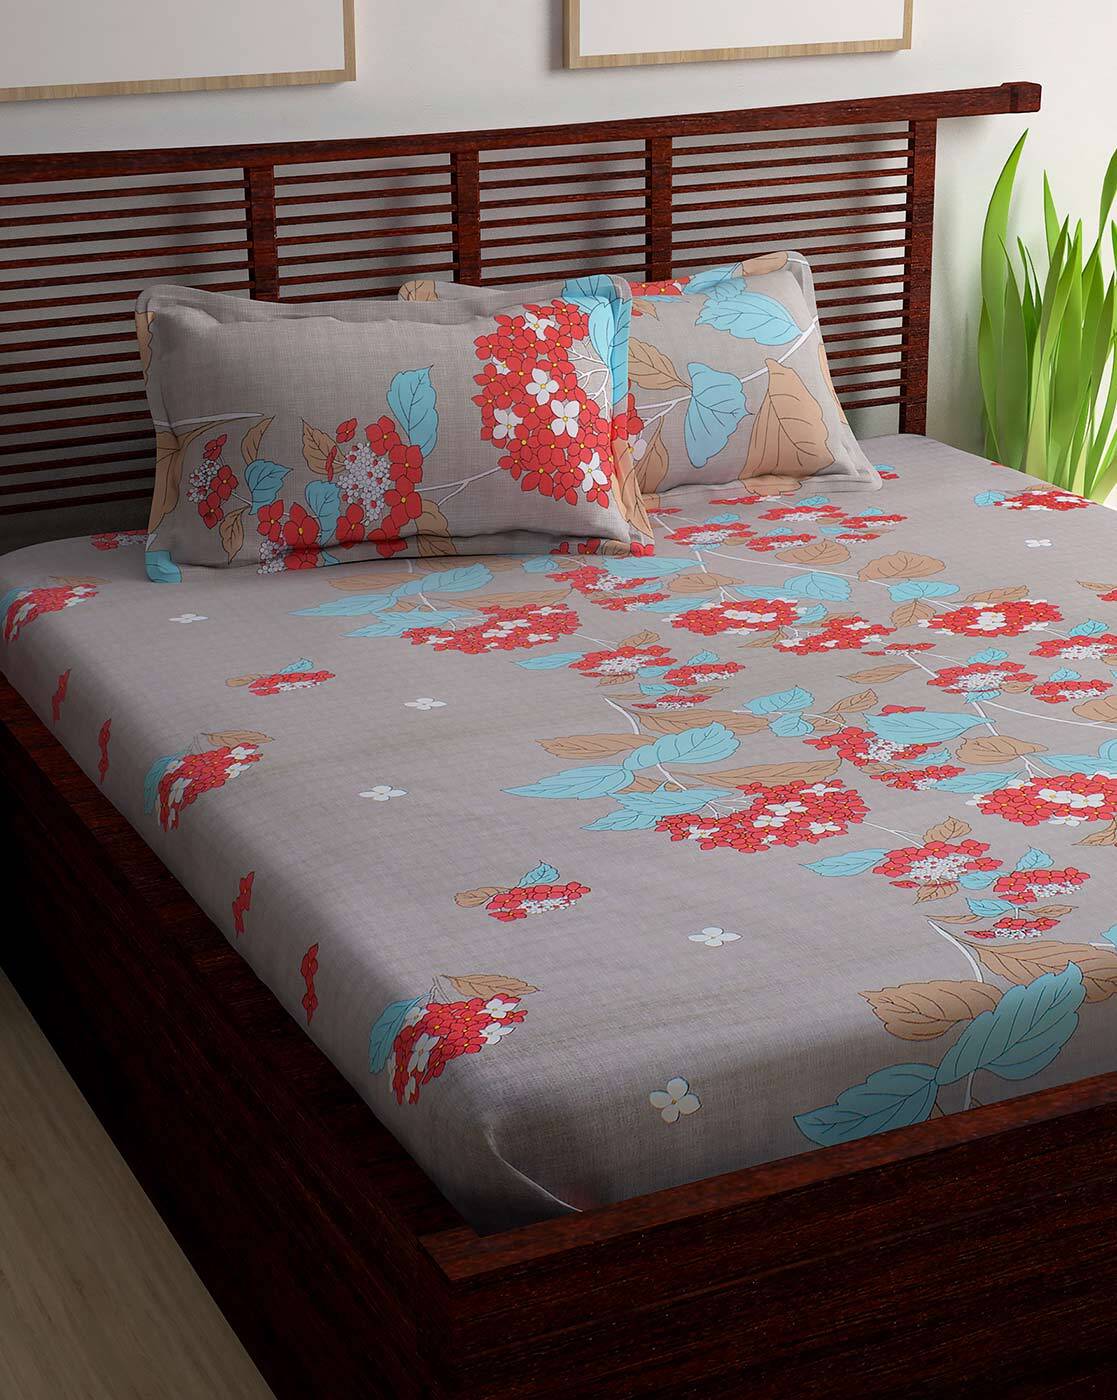 Buy Multicoloured Bedsheets for Home & Kitchen by Story@Home